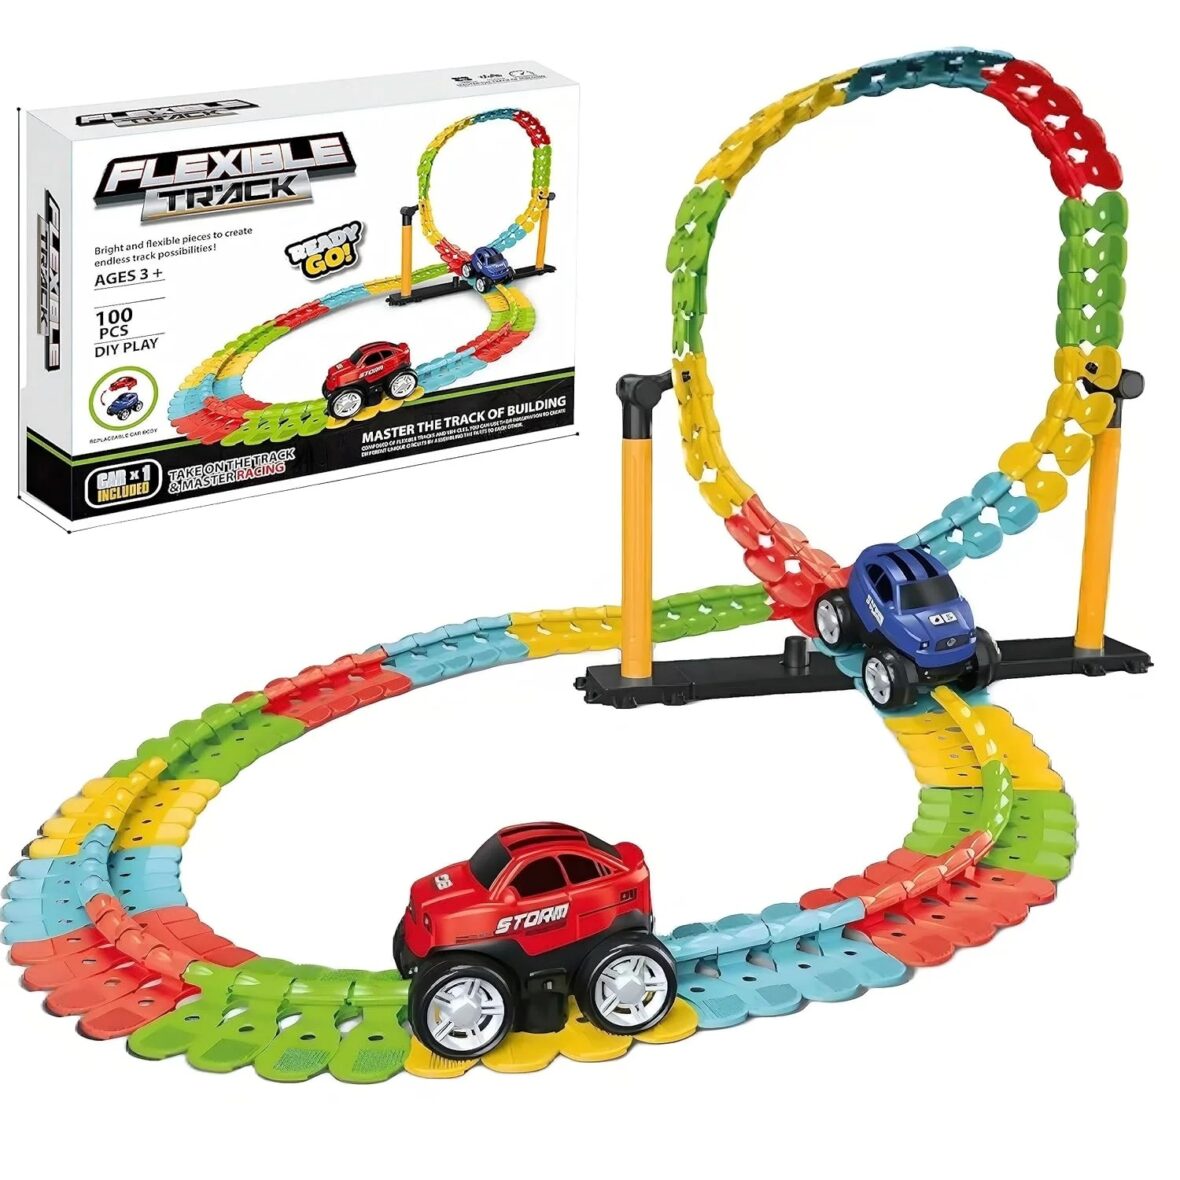 Flexible Puzzle Roller Coaster Racing Track Car Build And Customize Your Track 100 Pcs